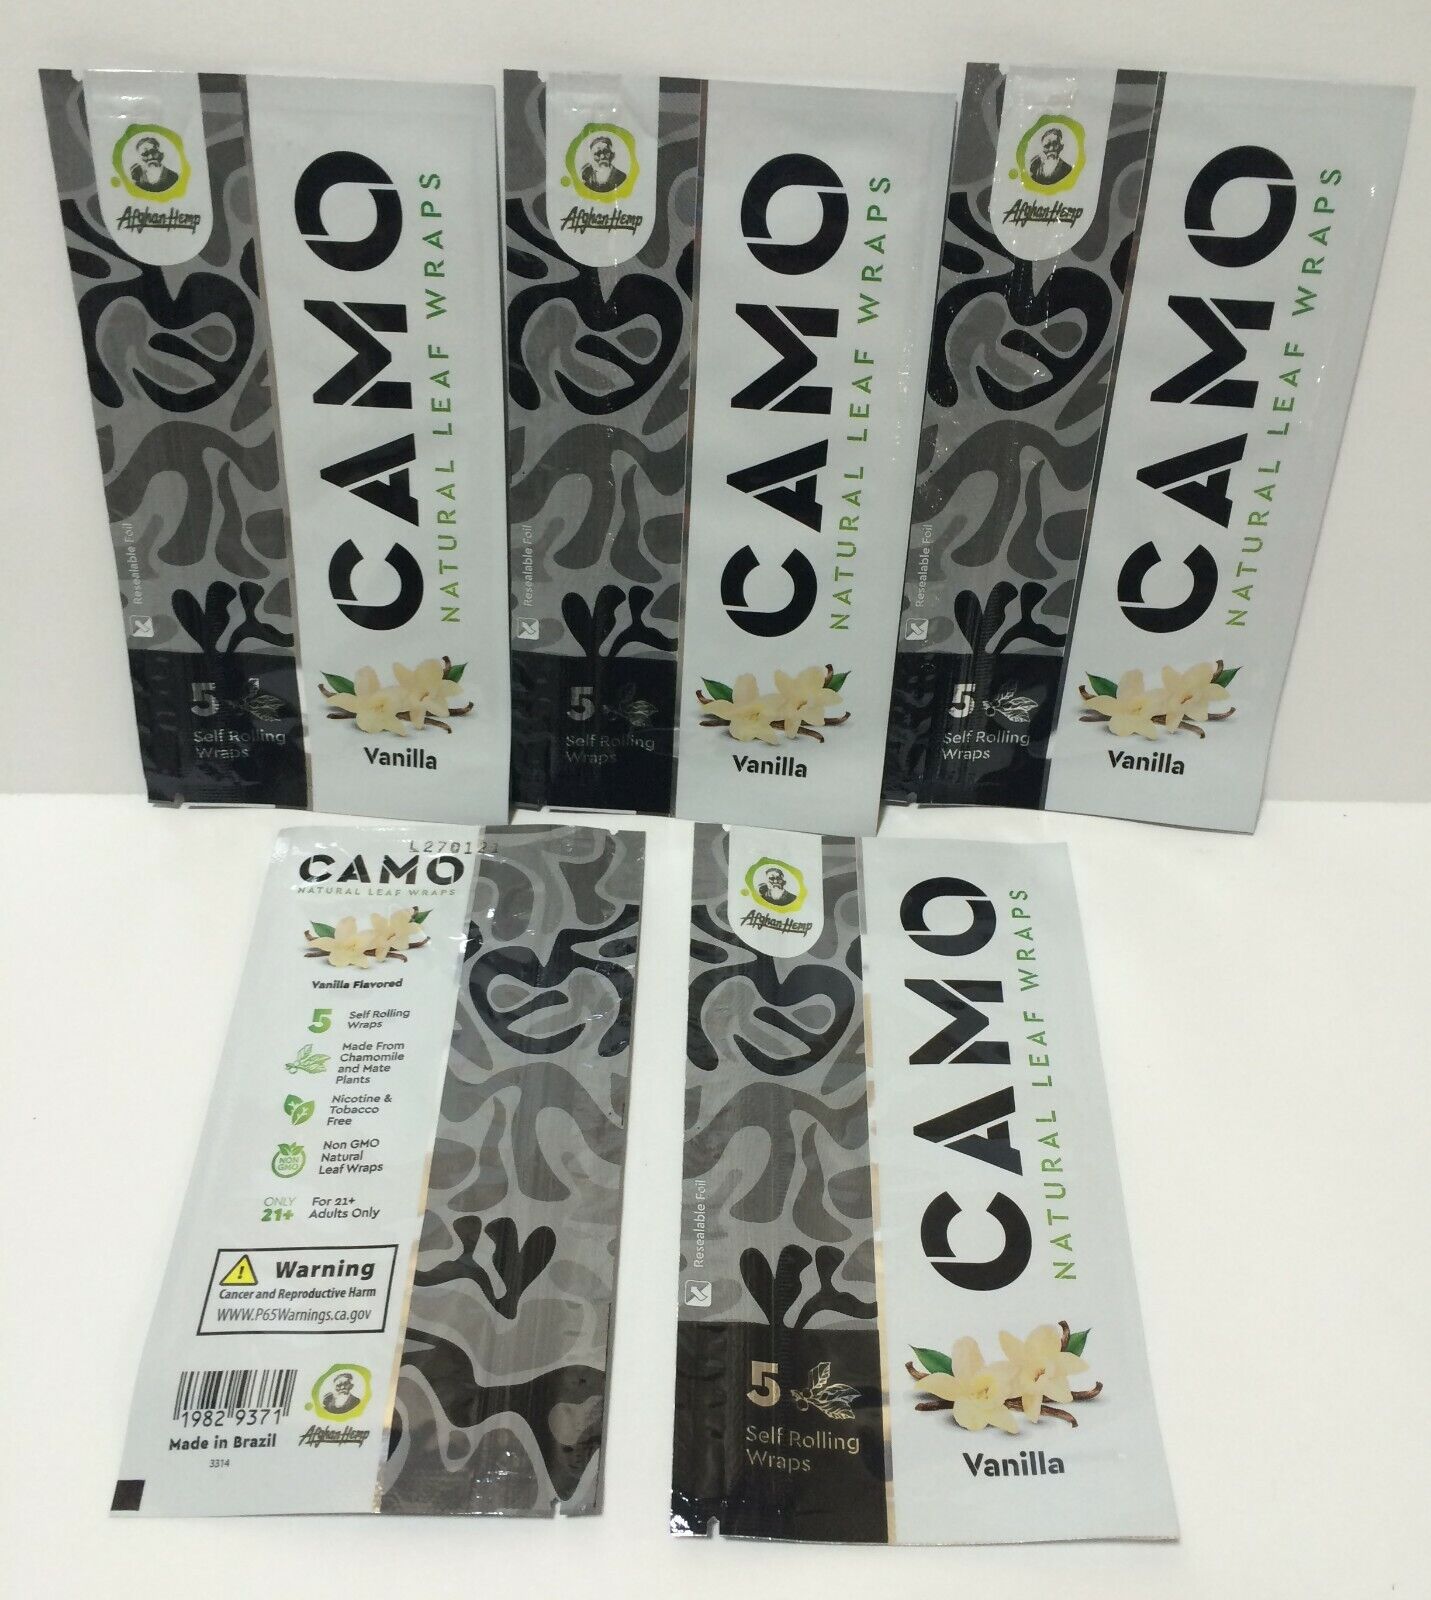 5 PACKS of CAMO NATURAL LEAF WRAPS - VANILLA - 25 SHEETS HERBAL CHAMOMILE MATE